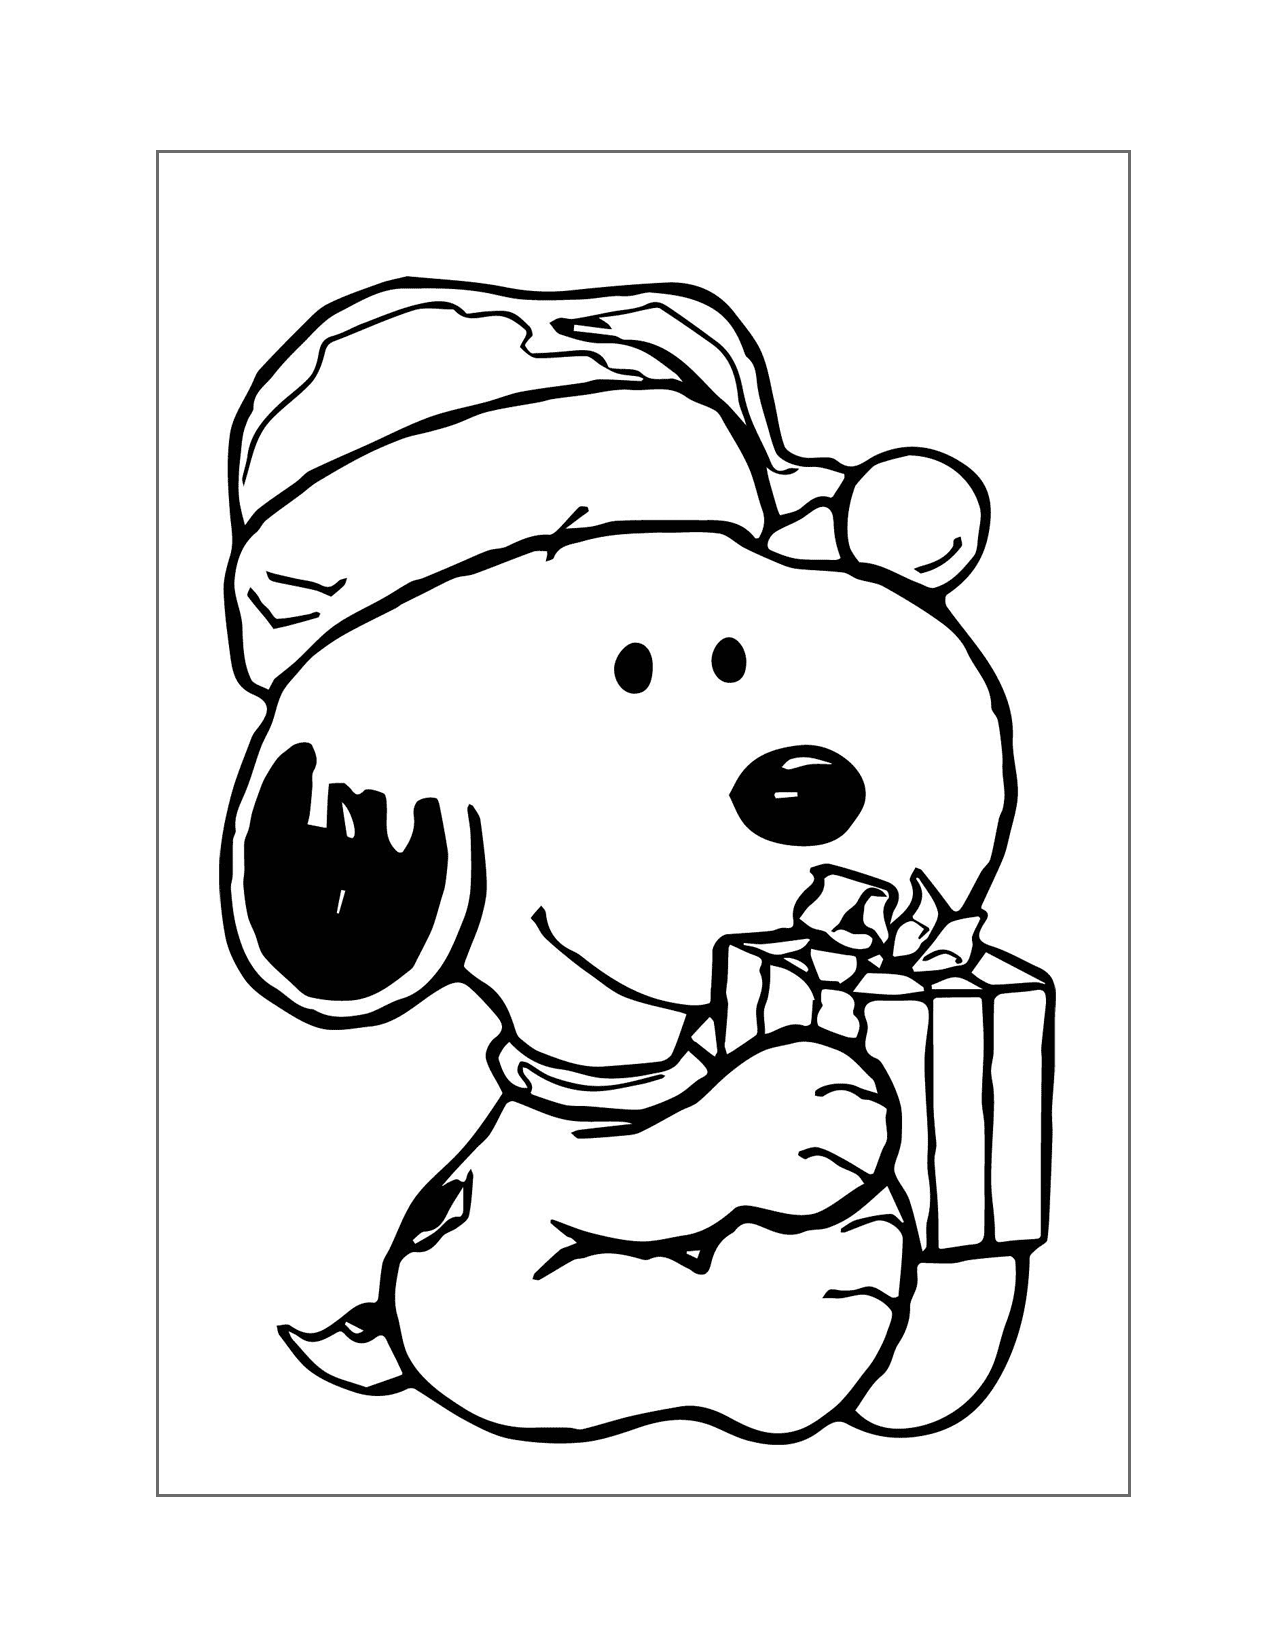 Snoopy With A Christmas Present Coloring Page